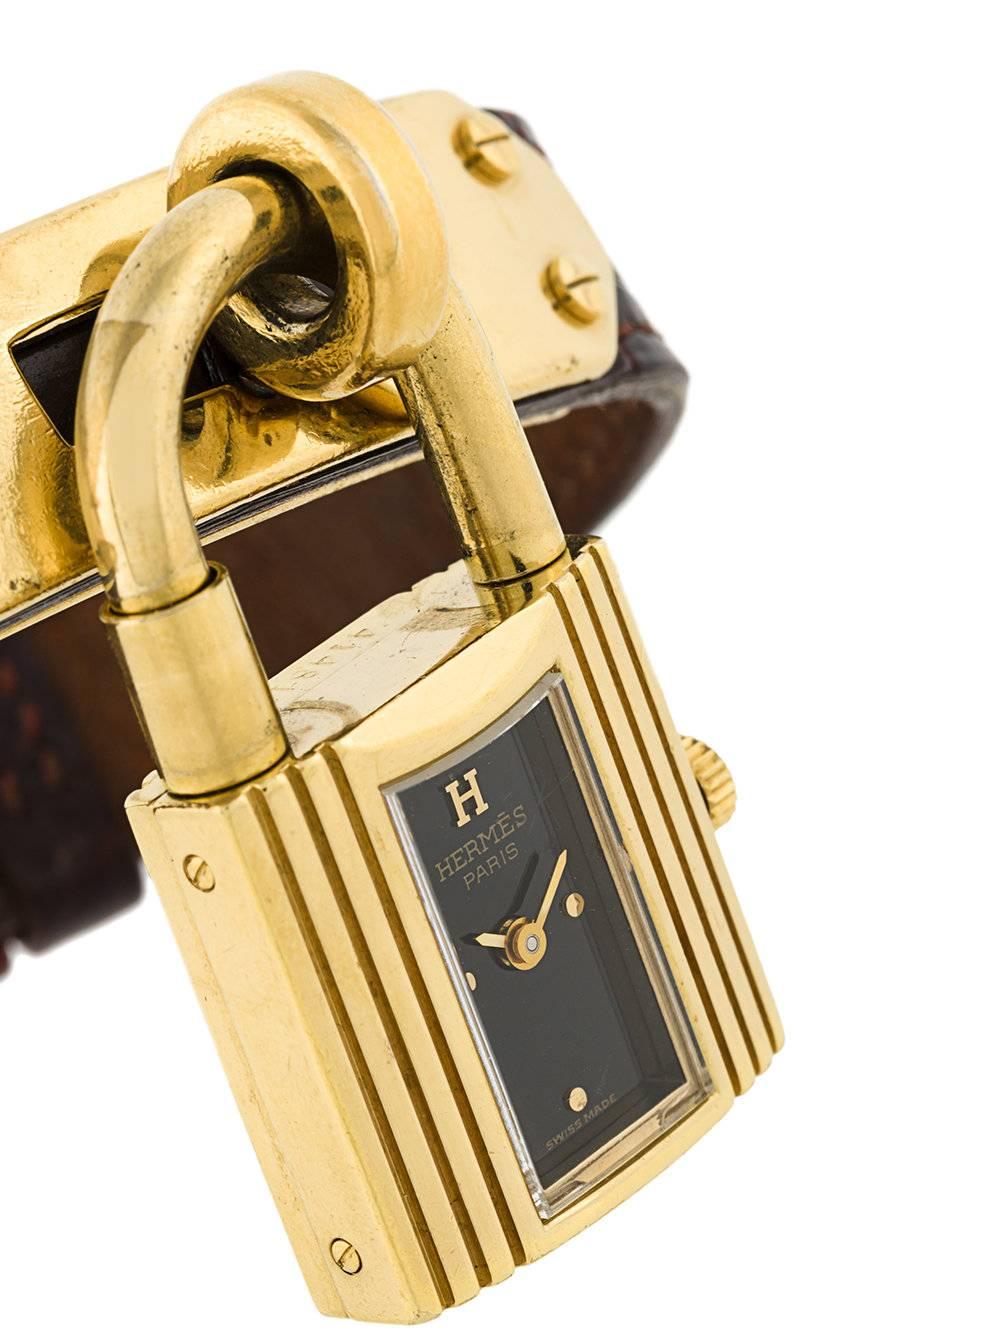 'Kelly' watch by Hermès in golden metal and bordeaux crocodile leather. The piece is hand wind and features two gold-tone hands with black background in a charming dangling padlock. The item was produced in 1989 and is vintage, it comes in very good